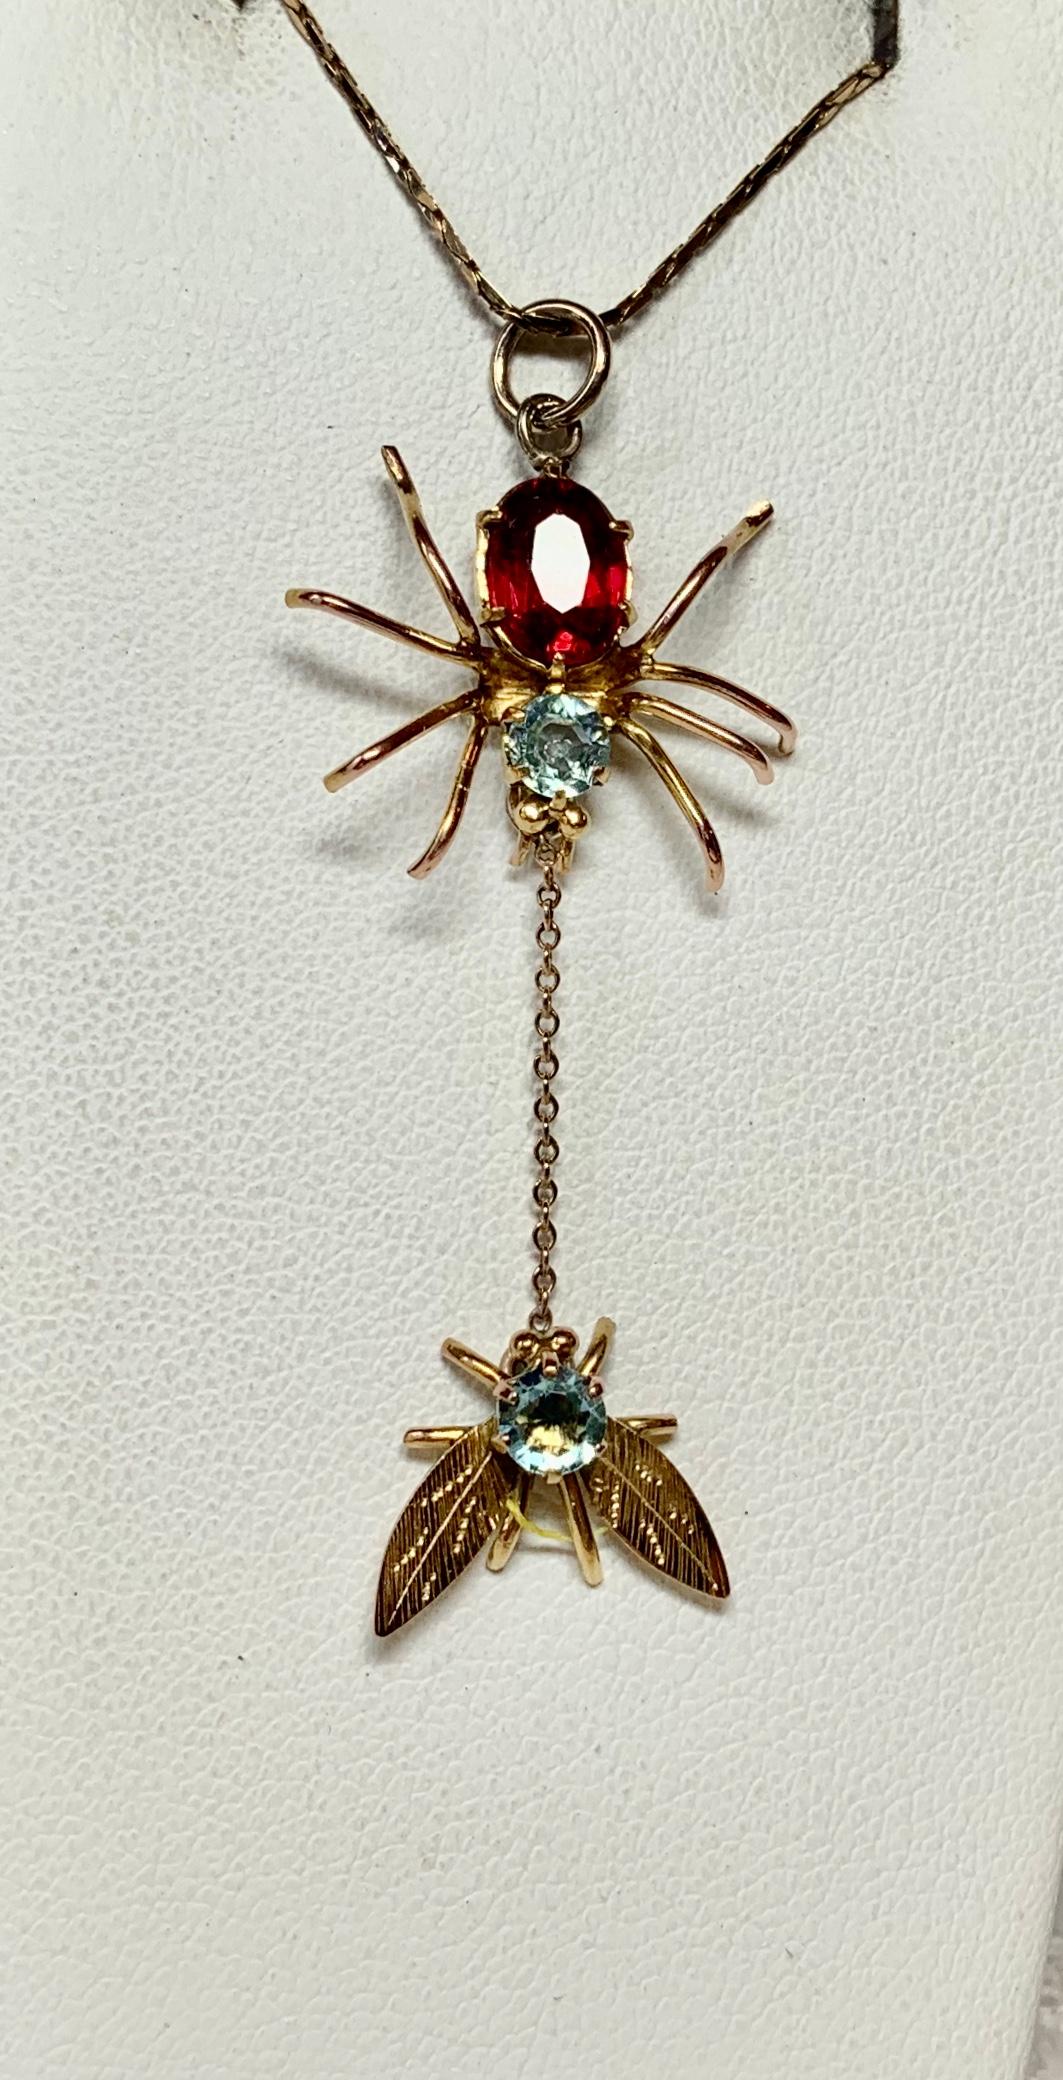 Spider and Fly Insect Pendant Necklace Aquamarine Garnet Gold Antique Art Deco 1